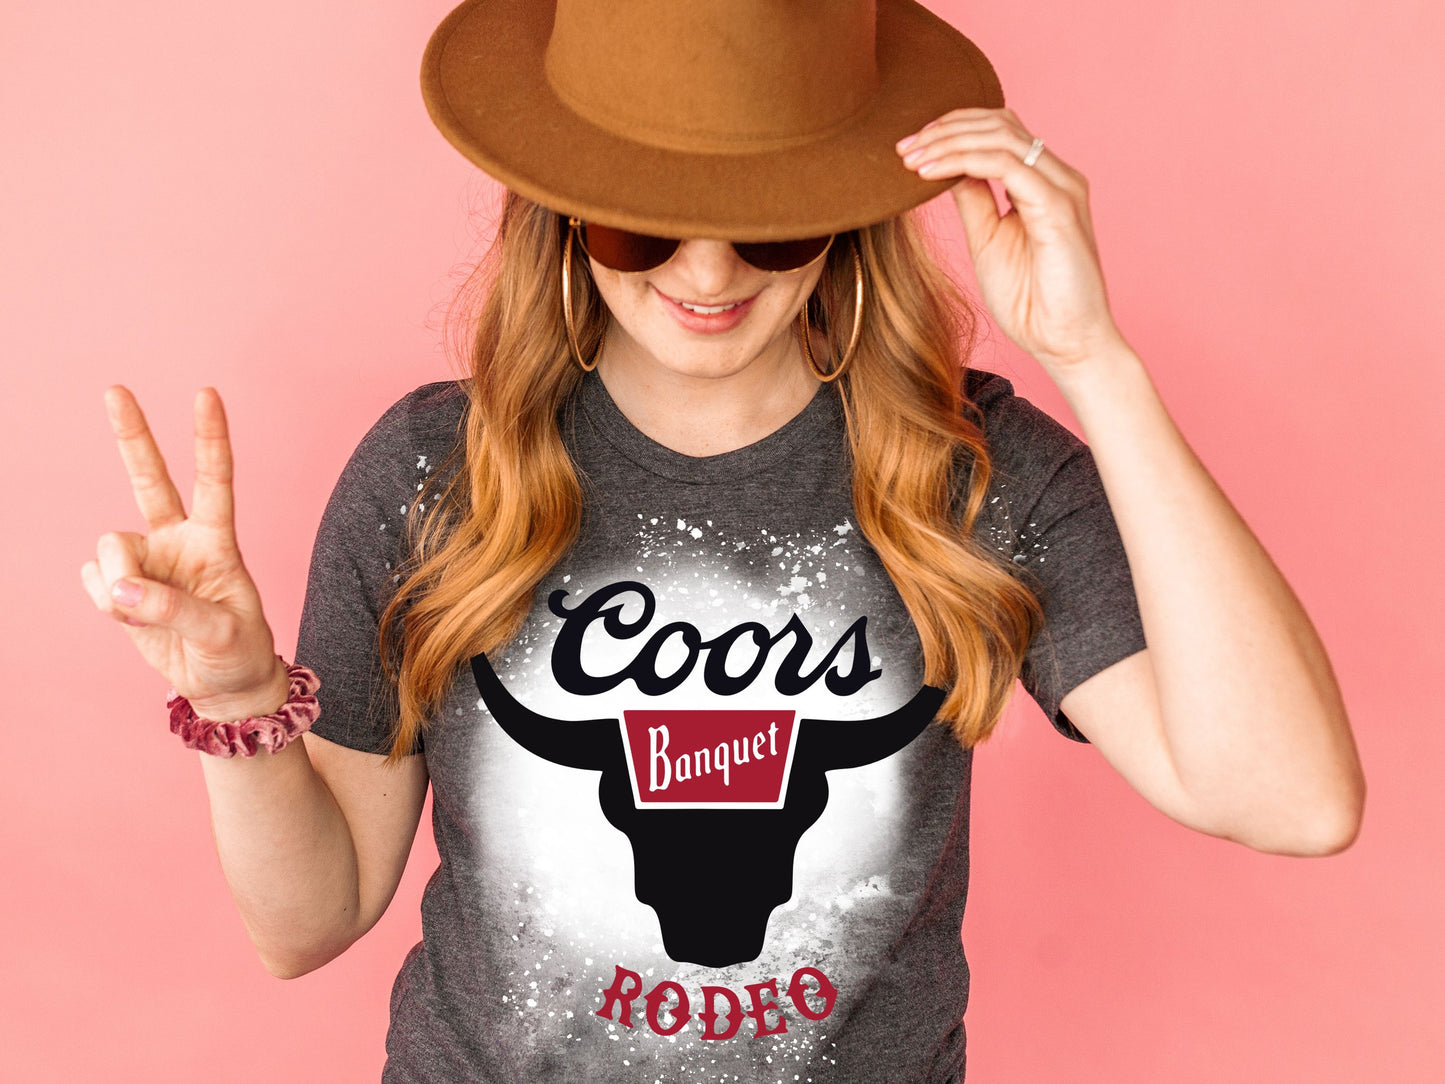 Coors Rodeo